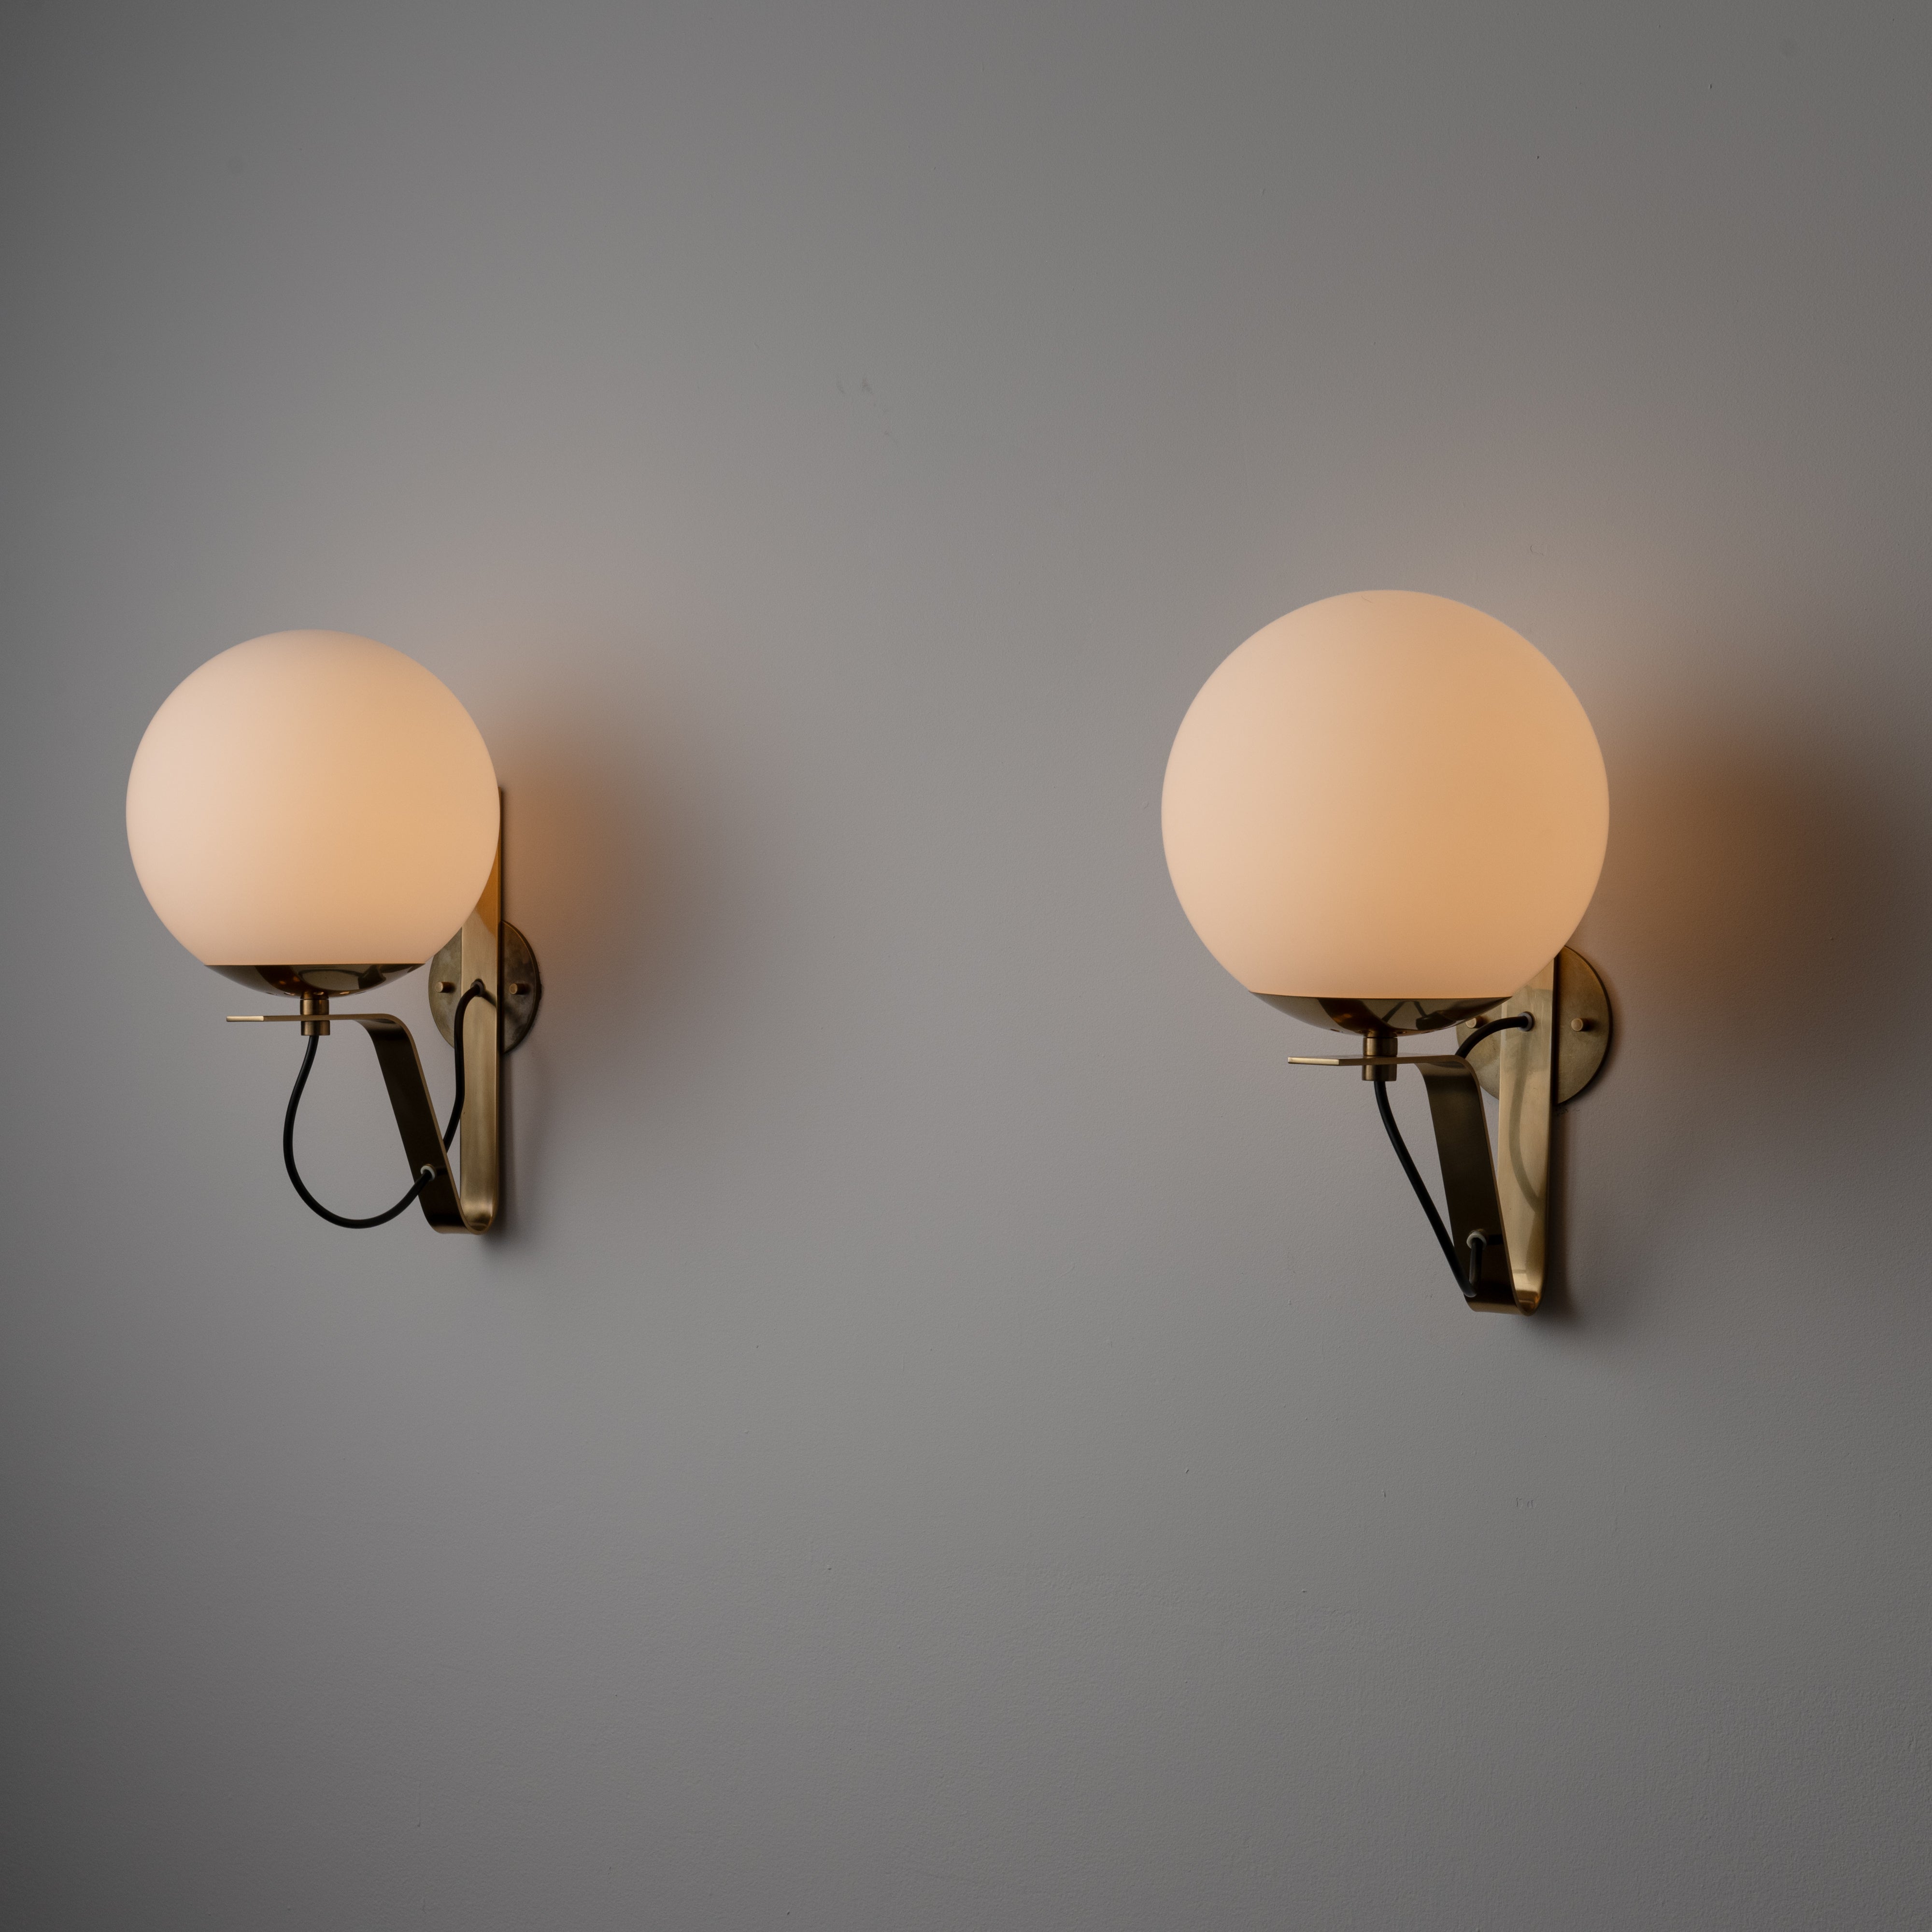 Model b464 sconces by Sergio Asti for Candle. Designed and manufactured in Italy circa 1960. Sconces are mounted by polished brass L-shaped bracket which seamlessly hold a frosted white globe over bulb socket. Custom US backplate added. We recommend